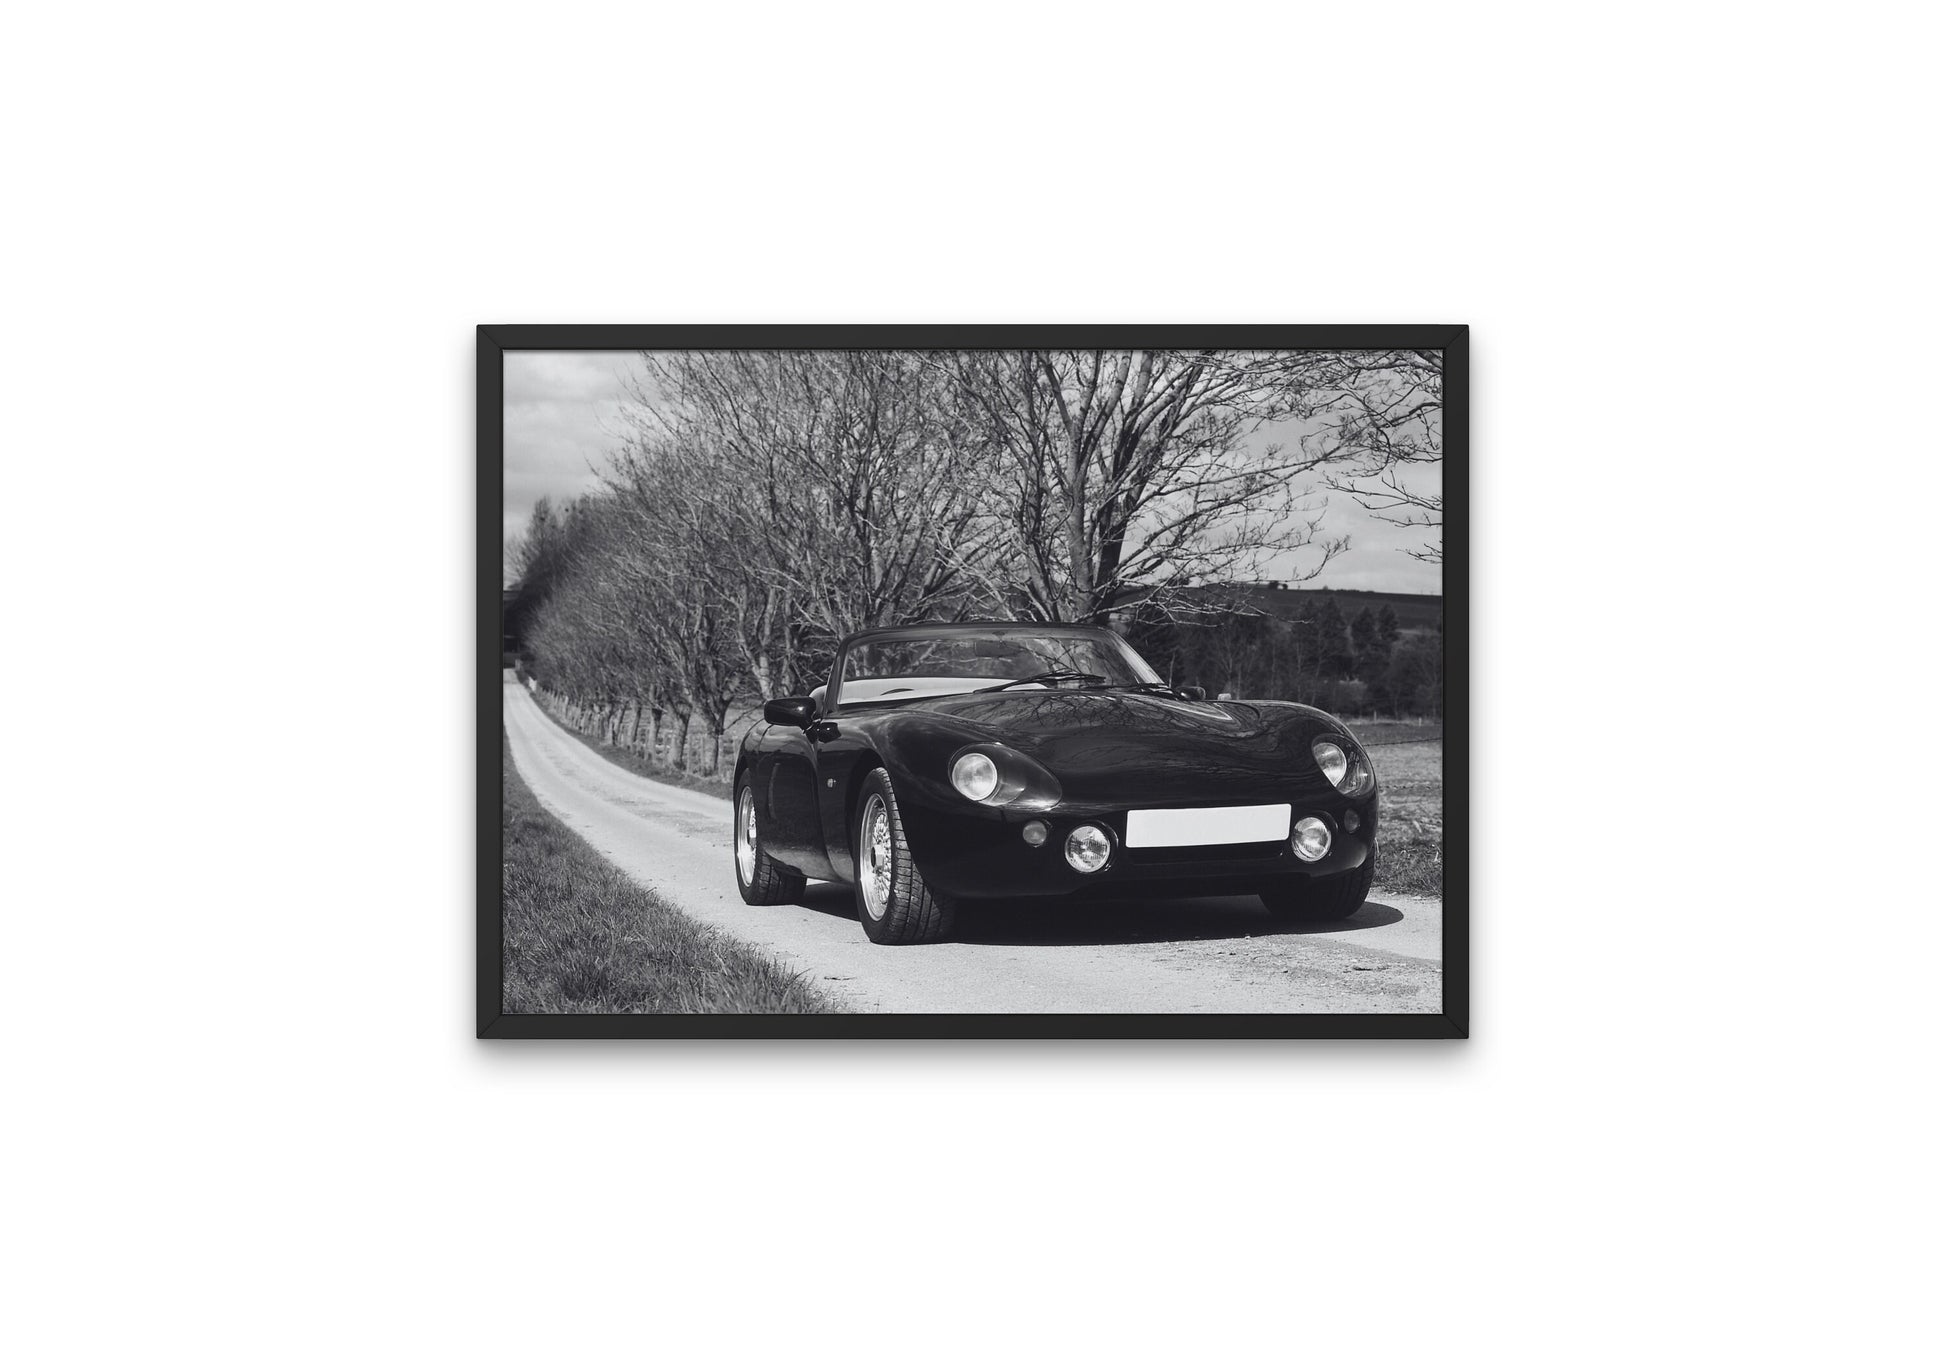 Black & White Luxury Vintage Car in the Country DIGITAL PRINT, Horizontal Wall Art, Car Photography, Retro Wall Decor, Old Car Picture, Glam